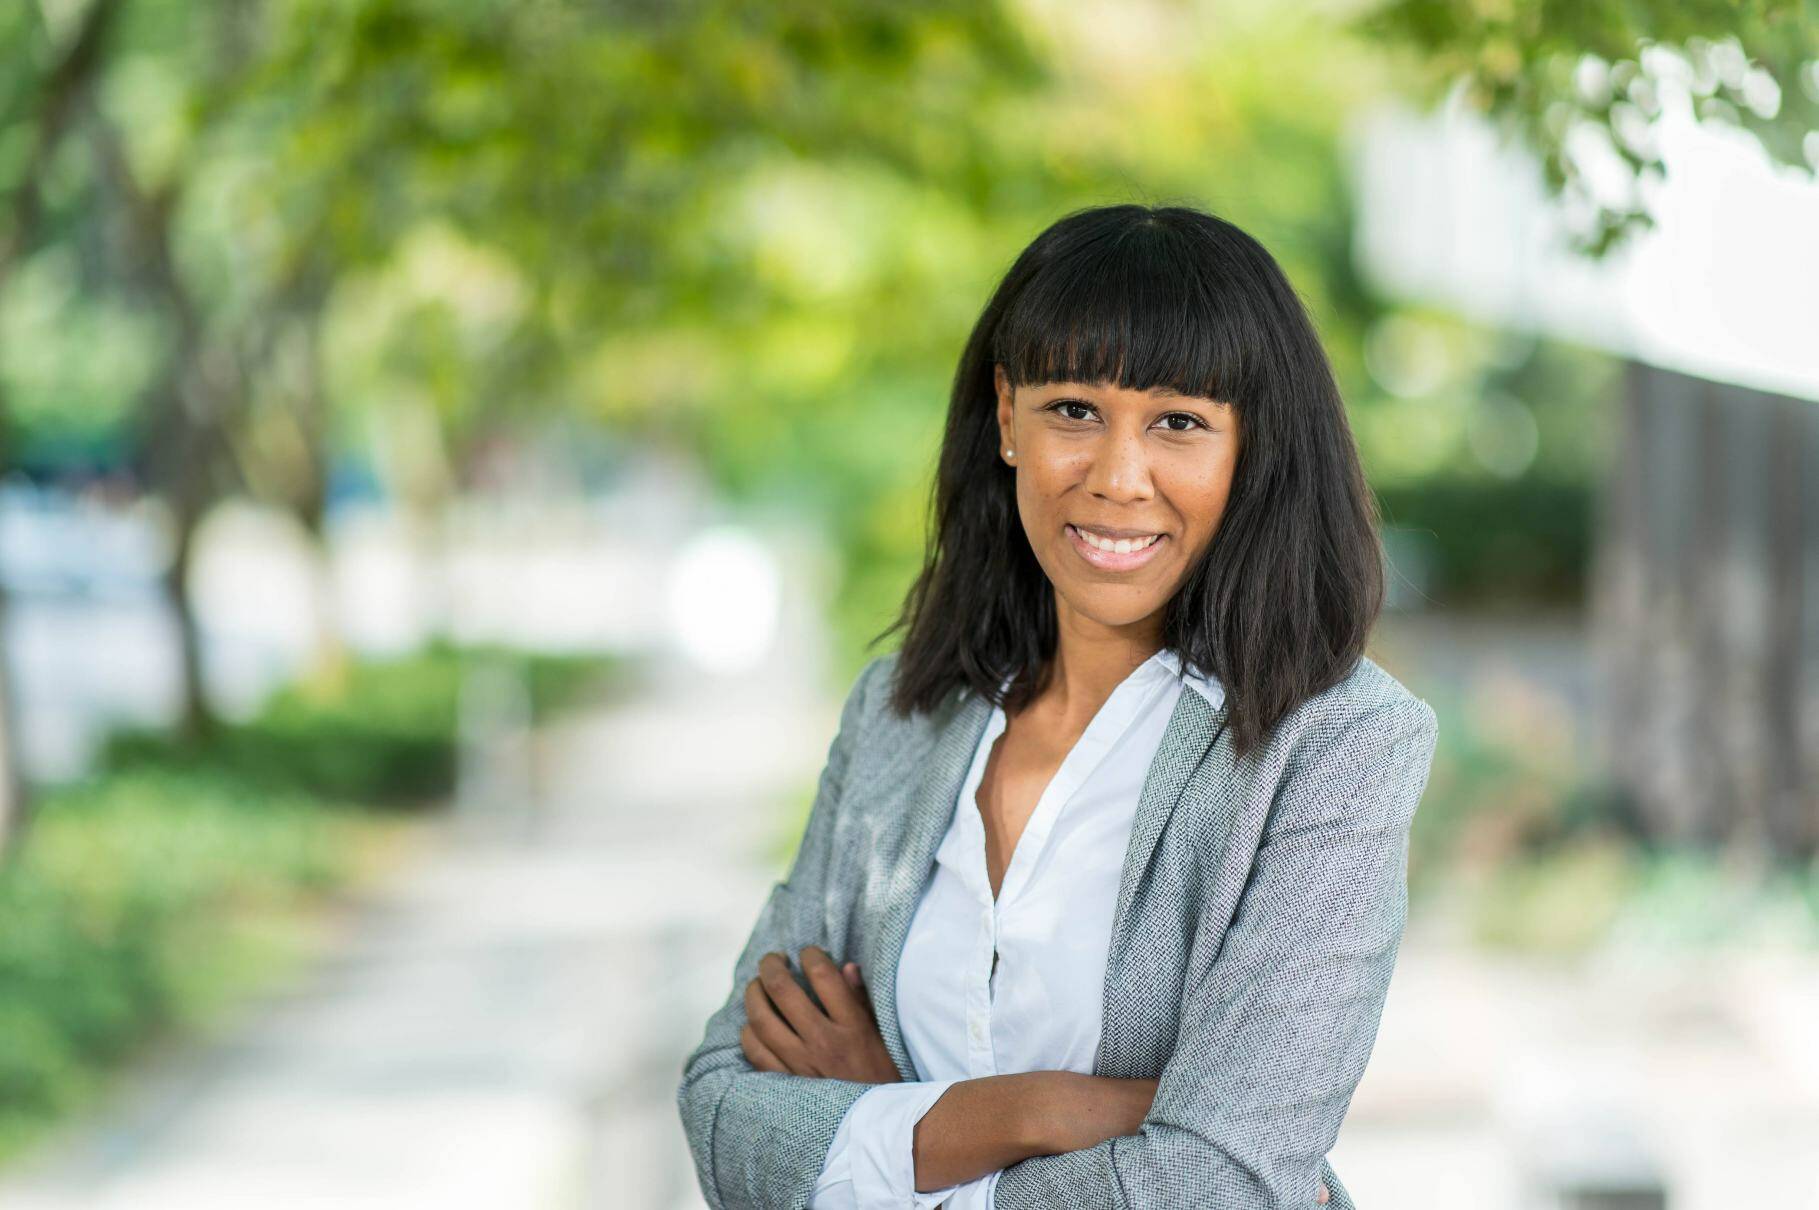 Ismalia de Sousa, a nurse and PhD student at the University of British Columbia school of nursing who helped found the Coalition of African, Caribbean and Black Nurses in B.C. (ismaliadesousa.com photo)